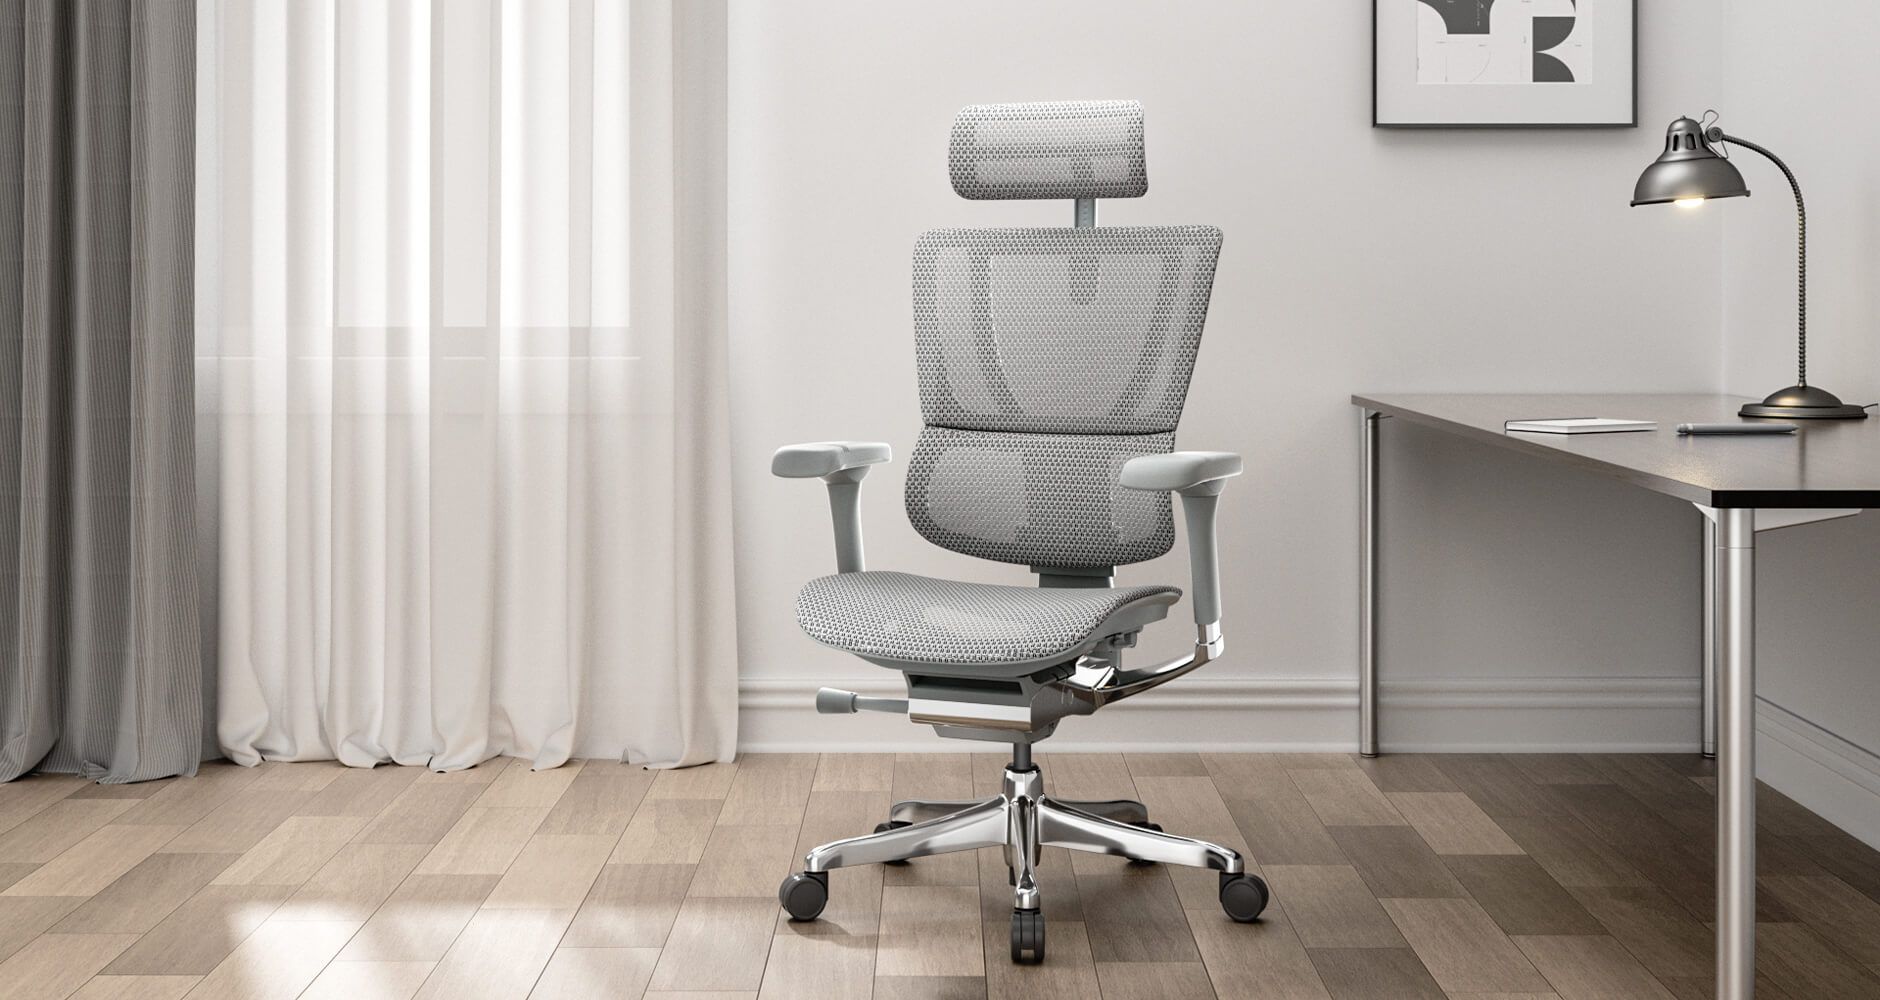 Mirus Elite office chair with silver mesh upholstery at a desk in front of a window.